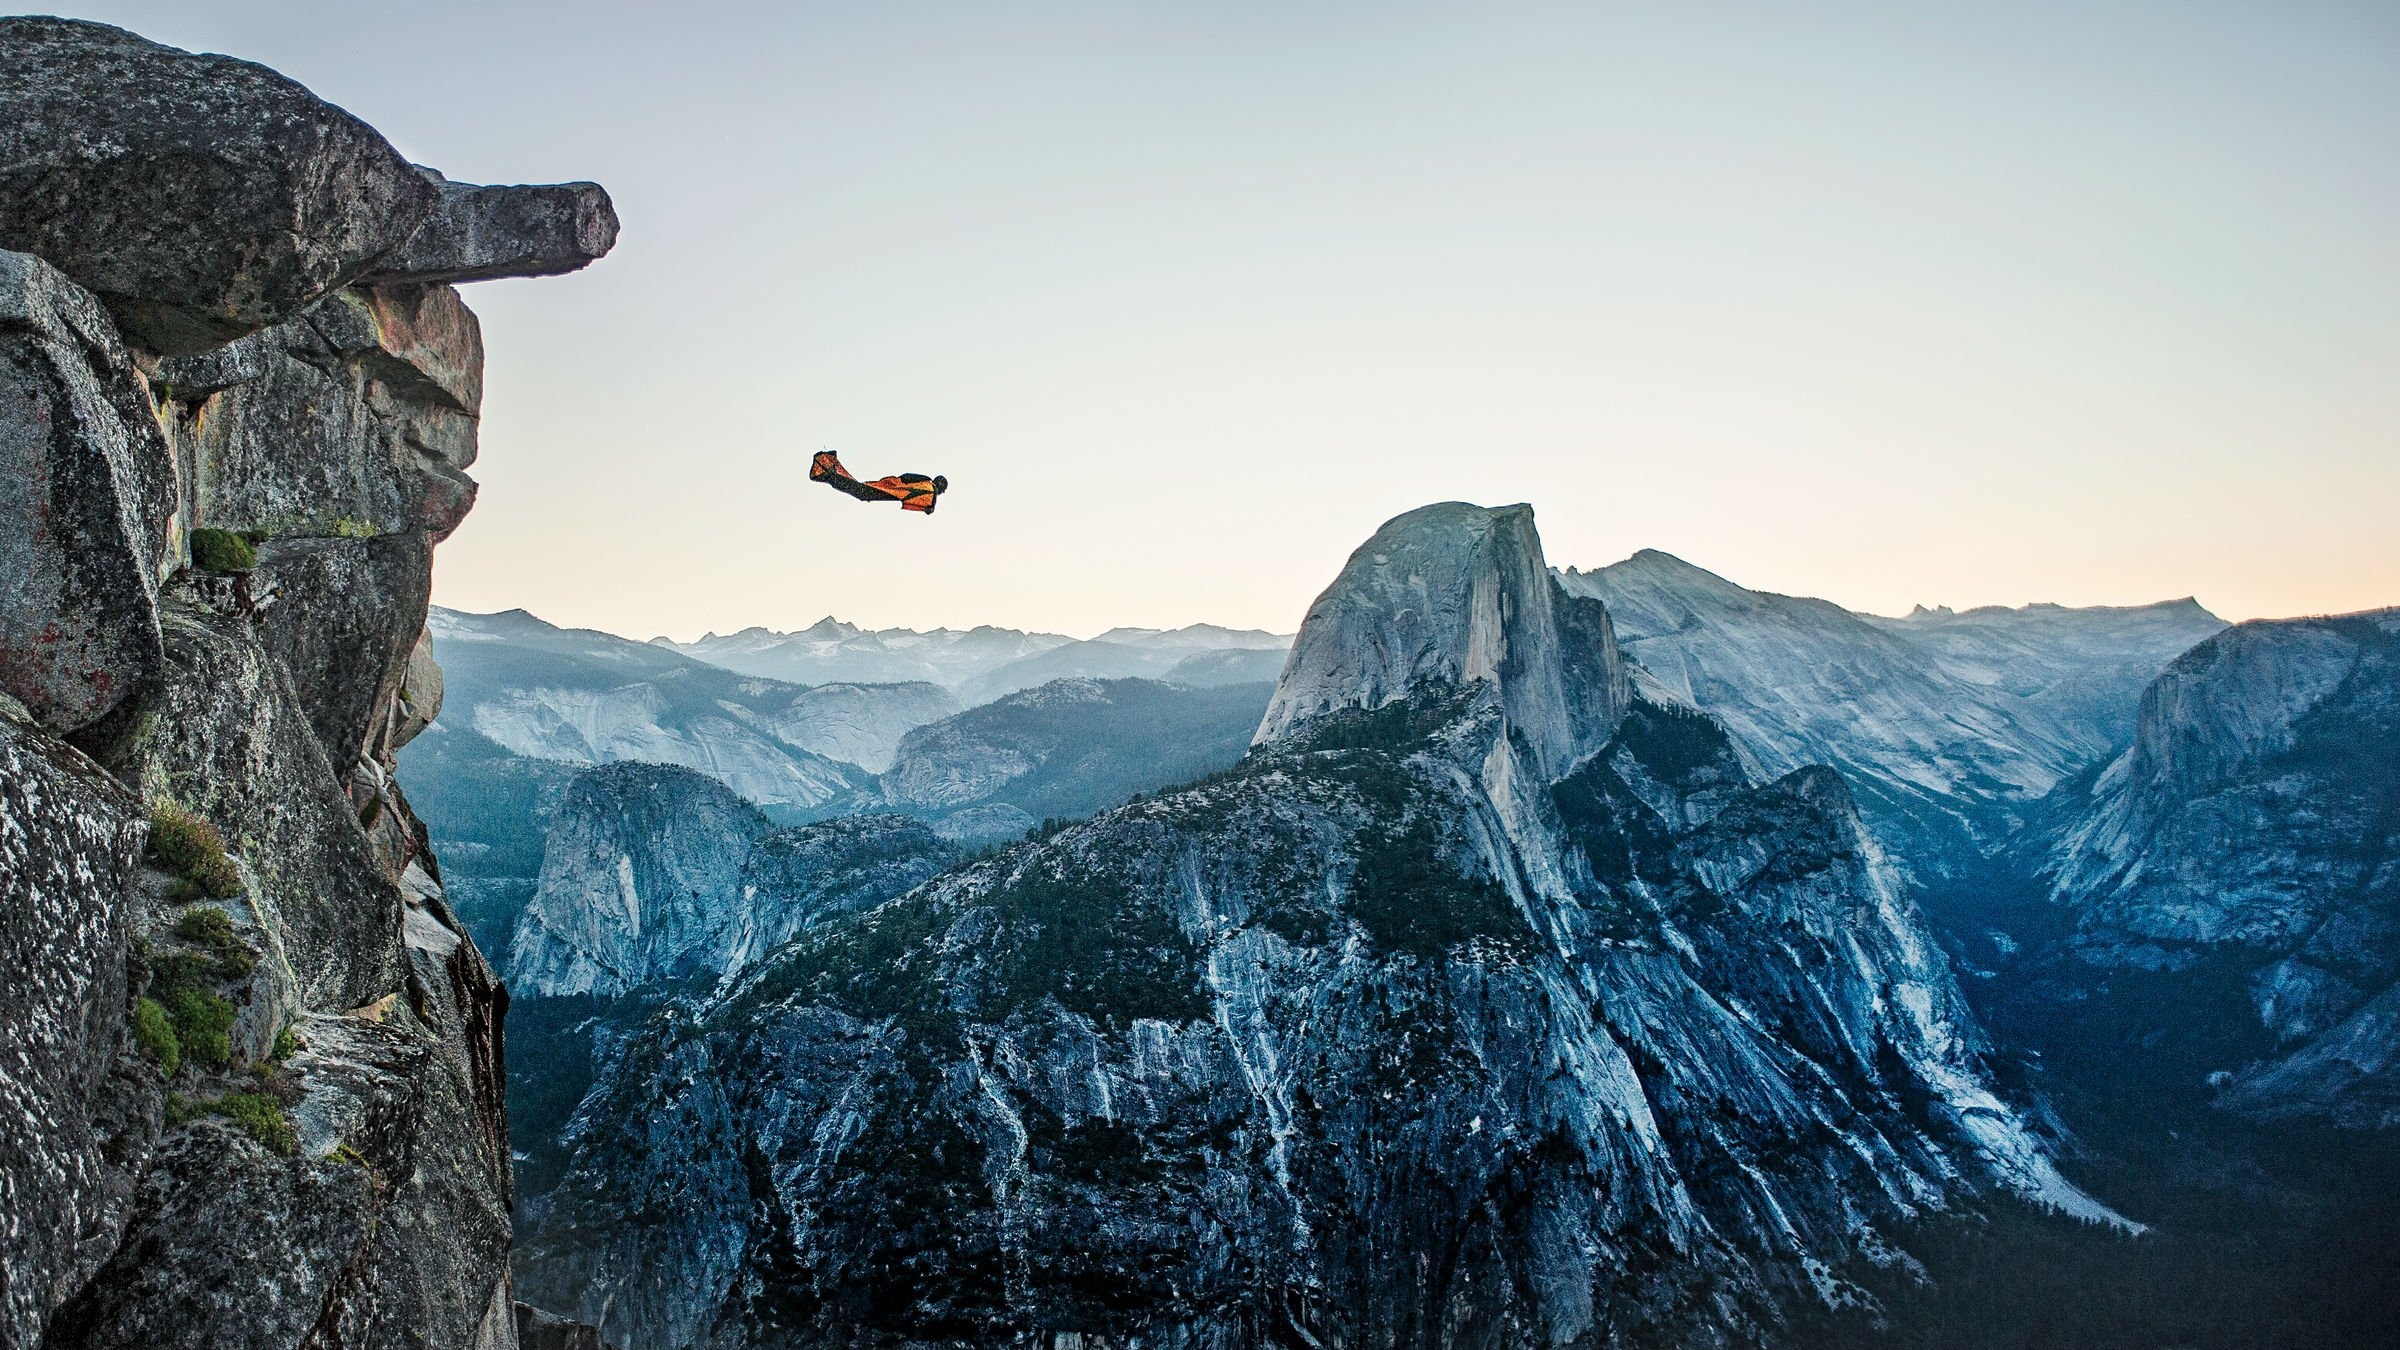 Wingsuit Flying: The leap of faith, Wingsuit skydiving in the mountains, Extreme sport. 2400x1350 HD Background.